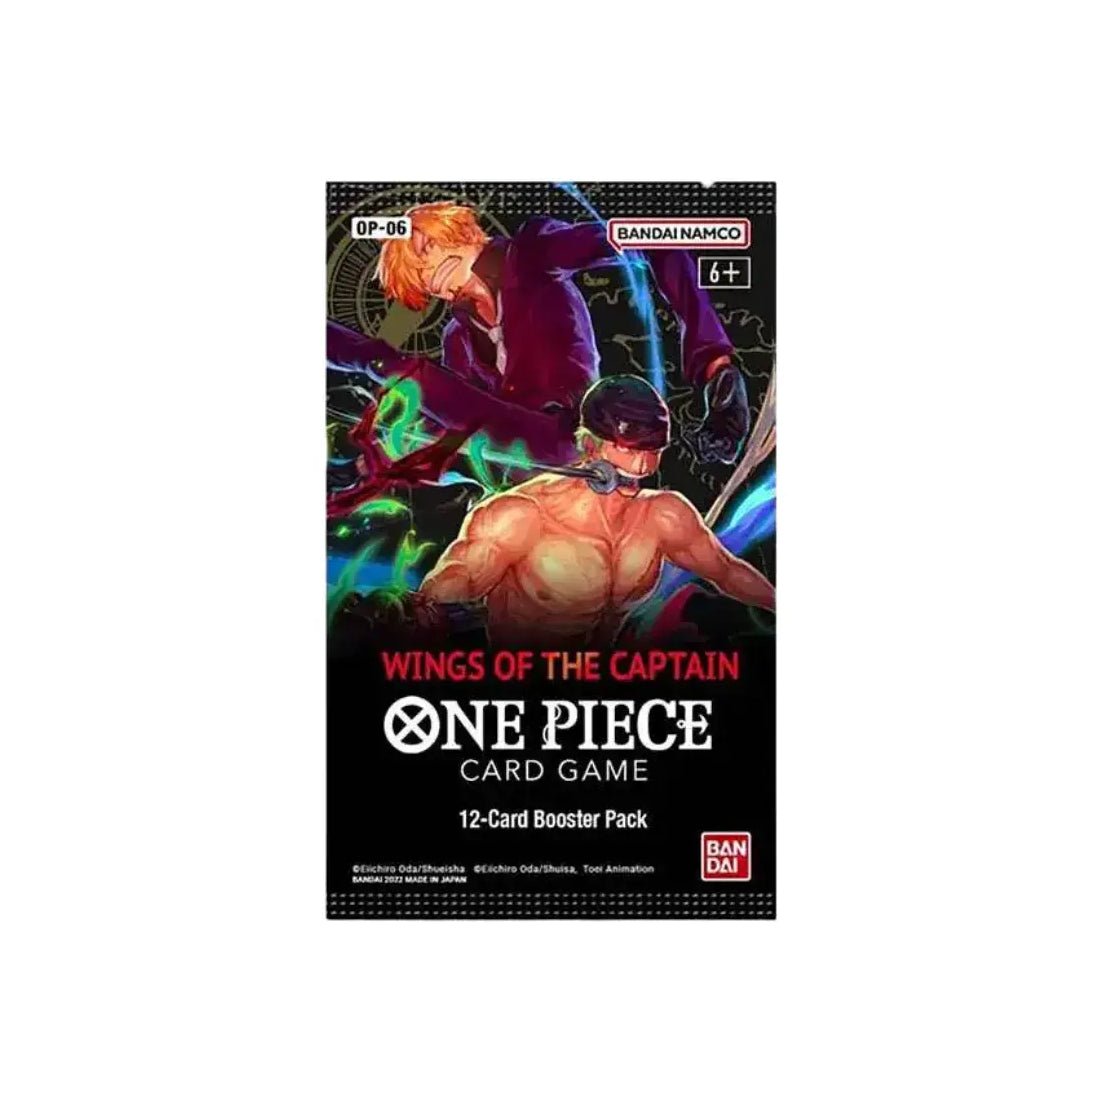 One Piece Card Game: Wings Of The Captain OP-06 Booster Pack - بطاقة ألعاب - Store 974 | ستور ٩٧٤